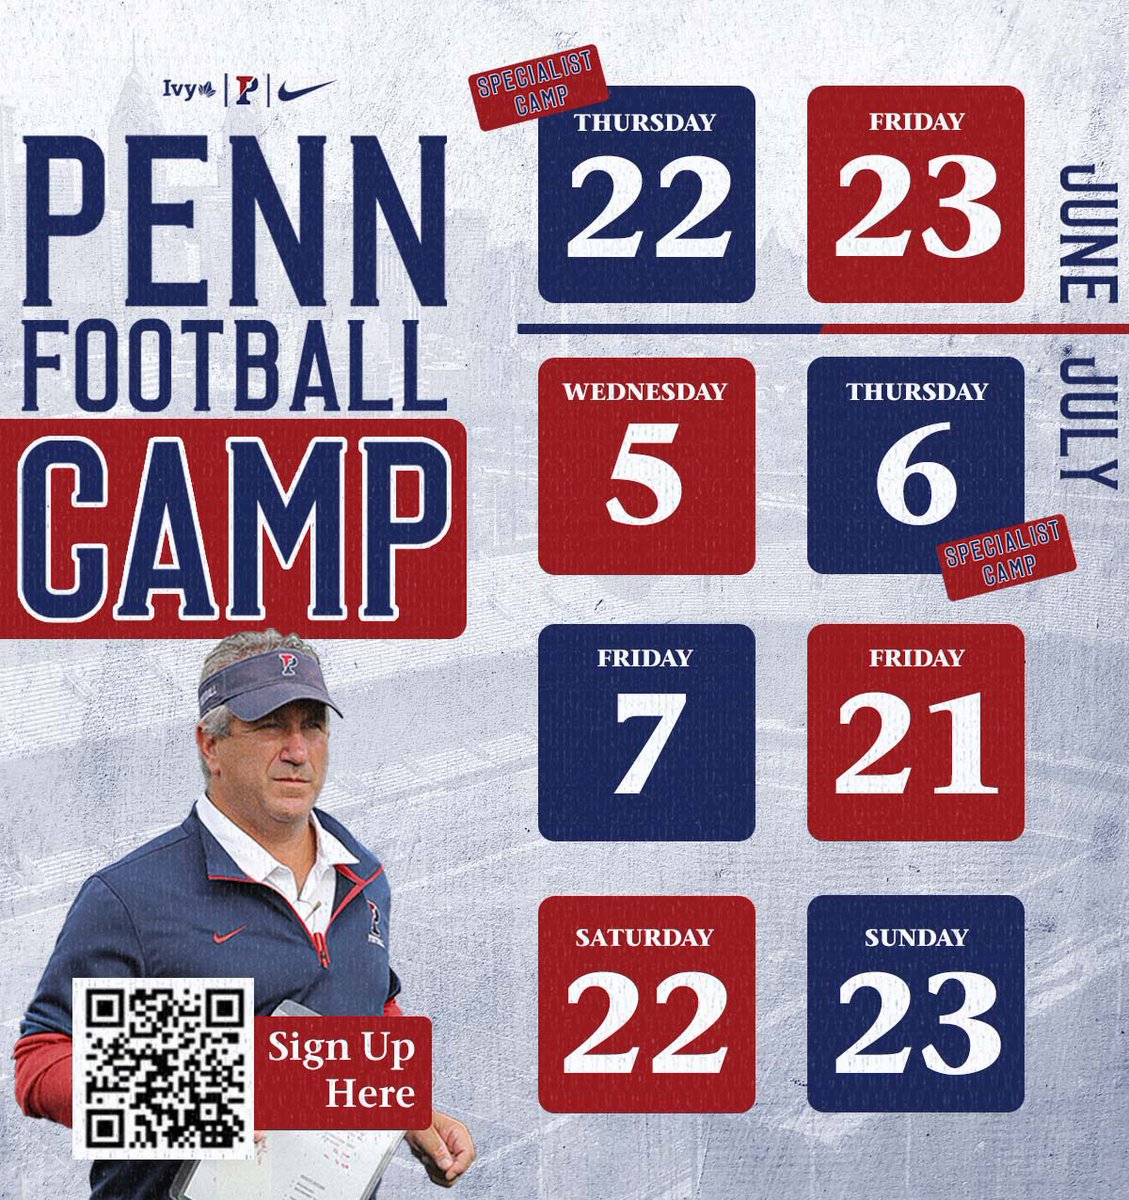 Mark your calendars! Come to camp! Get coached and evaluated by our coaches! 🔴🏆🔵

#BEGREAT #FightOnPenn #PennPride